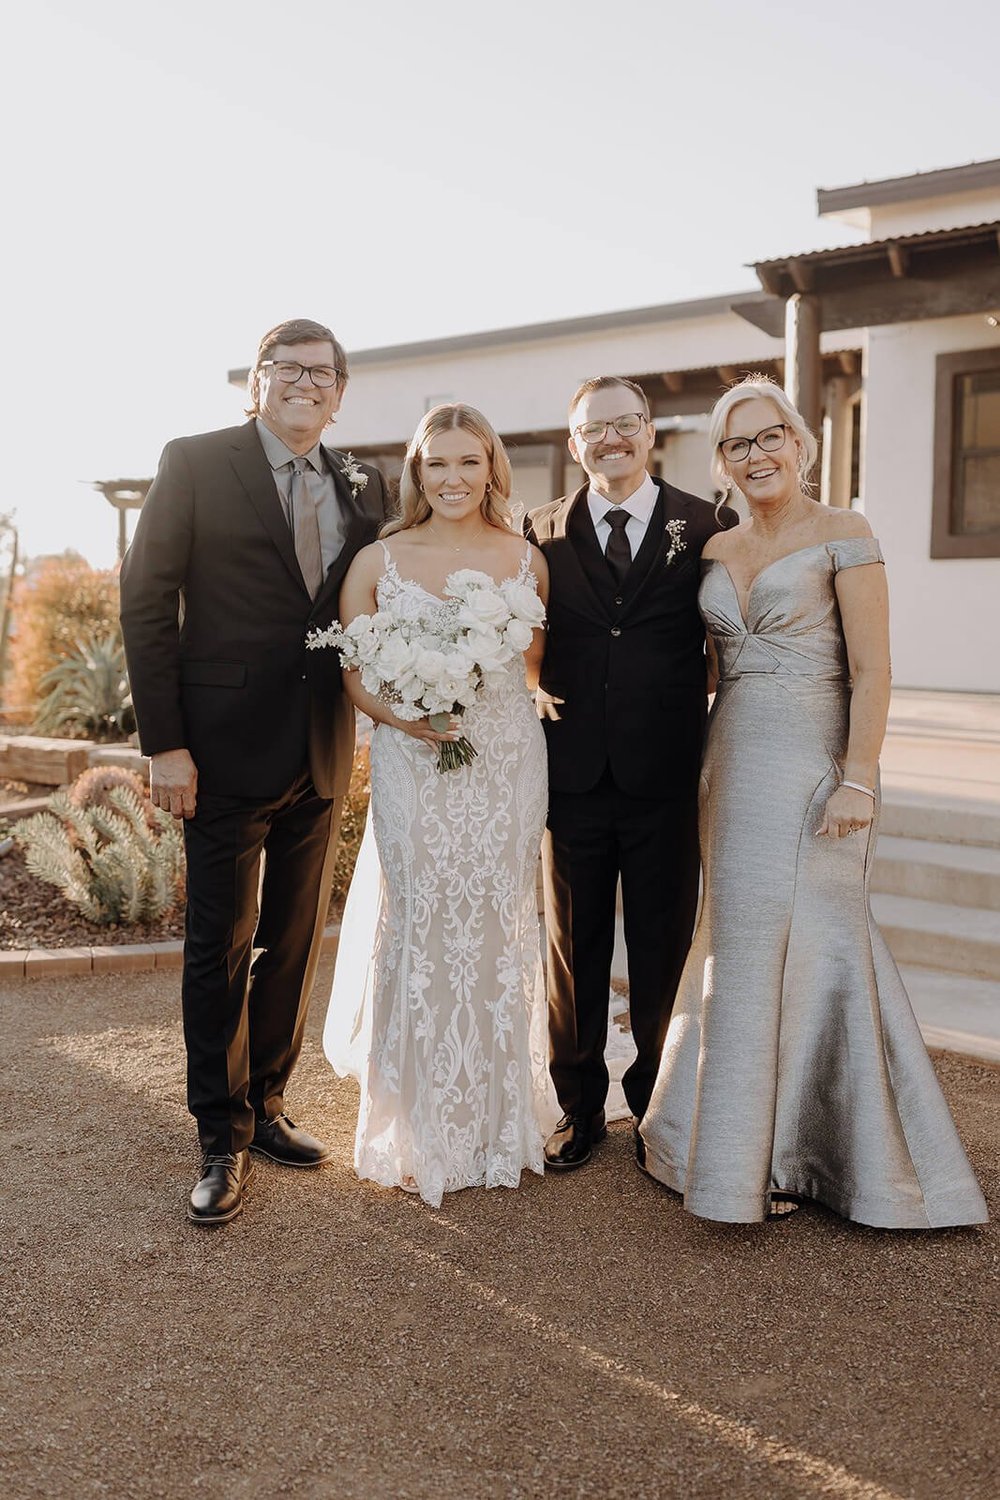 Bride and groom with their parents at Arizona destination wedding